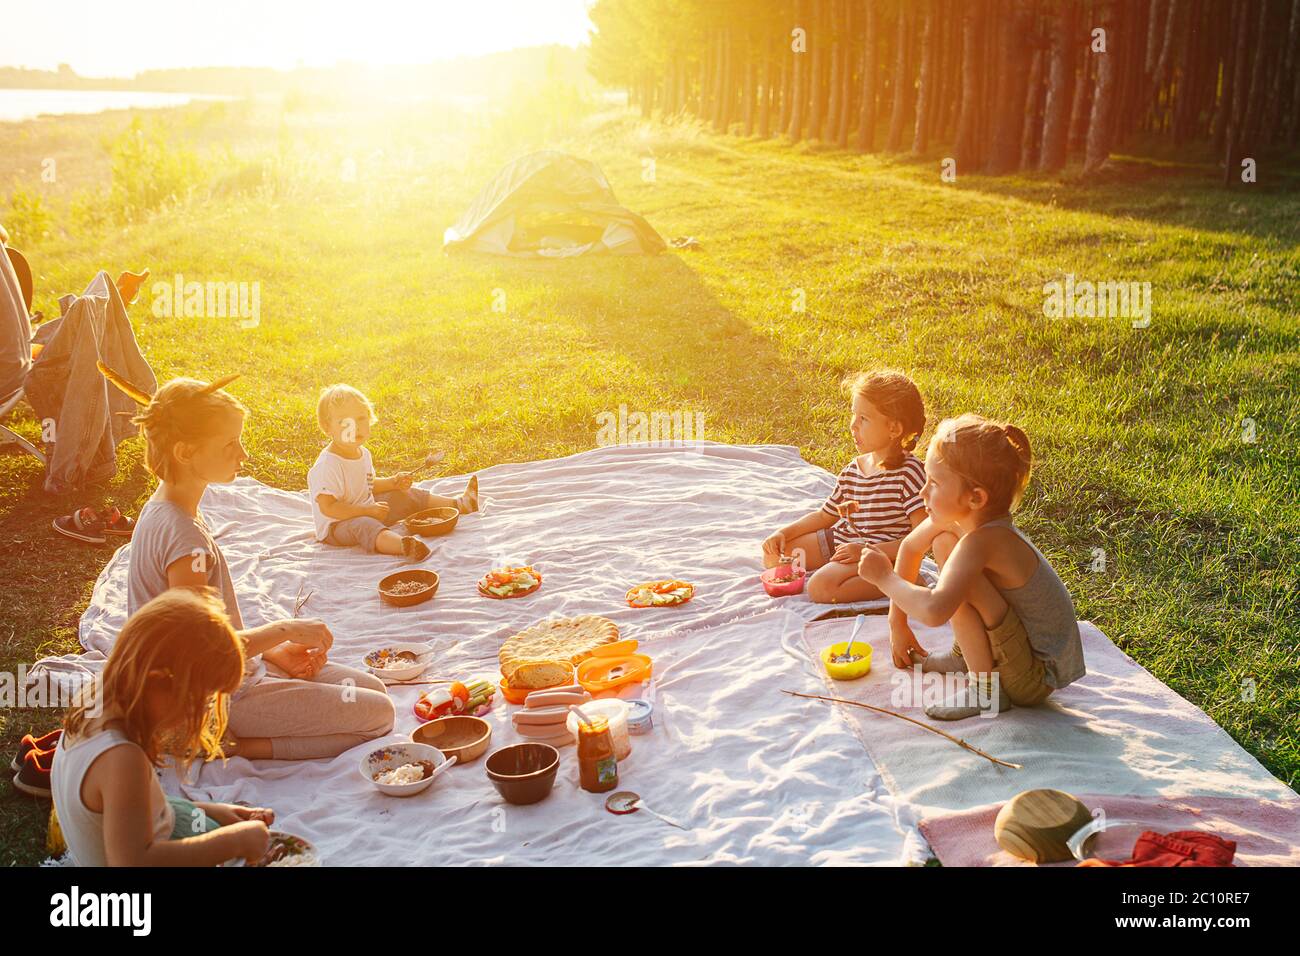 Kids having picnic on a lawn, lighted with a beautiful setting sun. Stock Photo